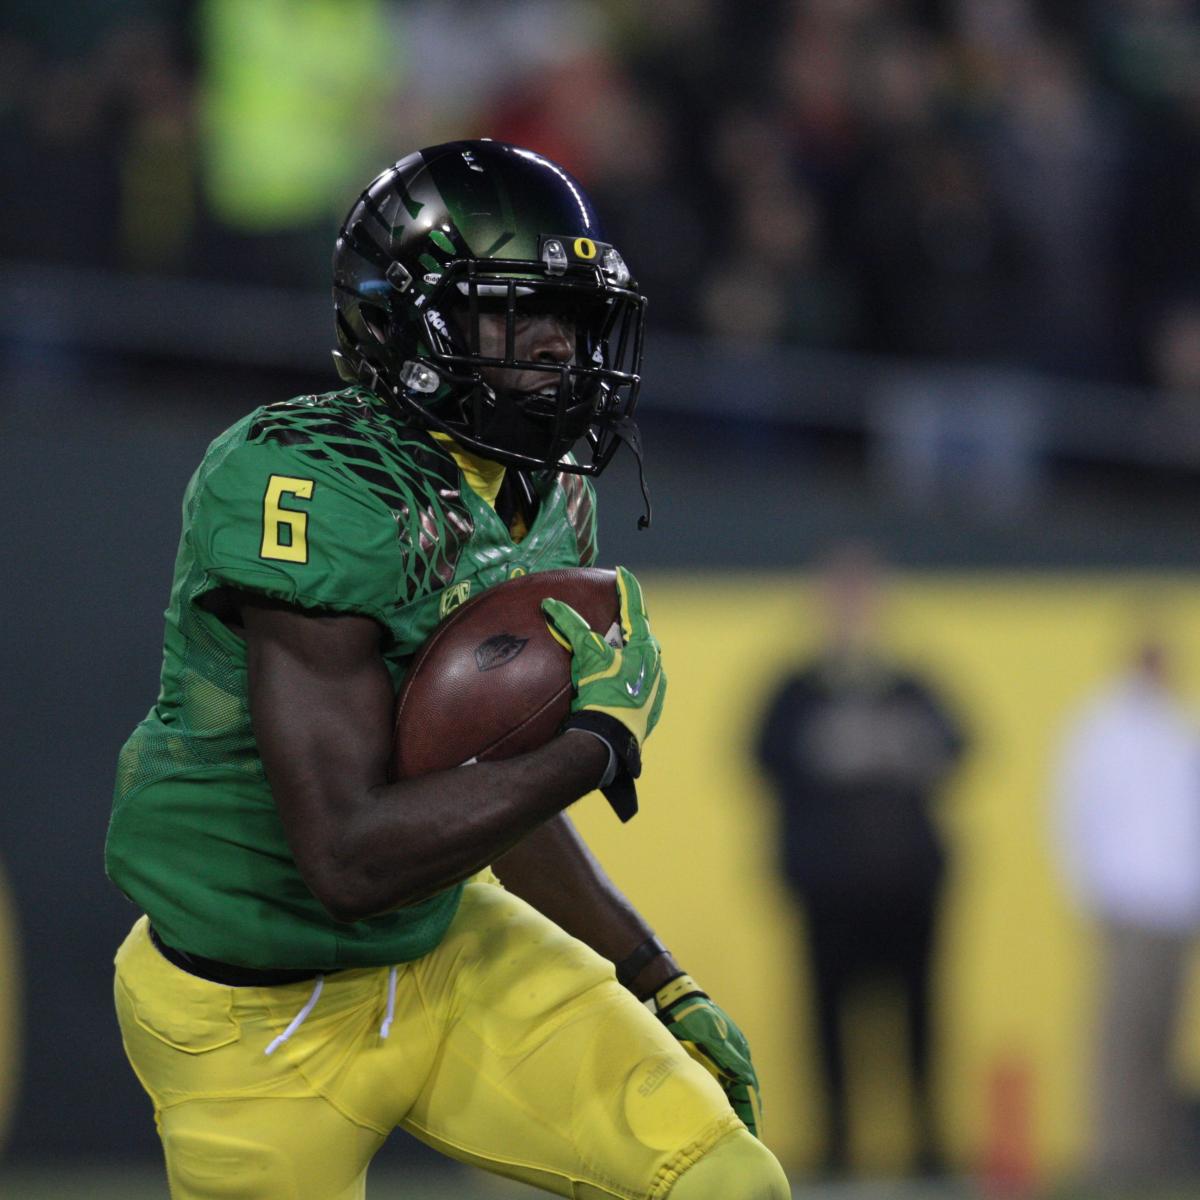 De'Anthony Thomas Will Prove His Draft Worth at NFL Combine News